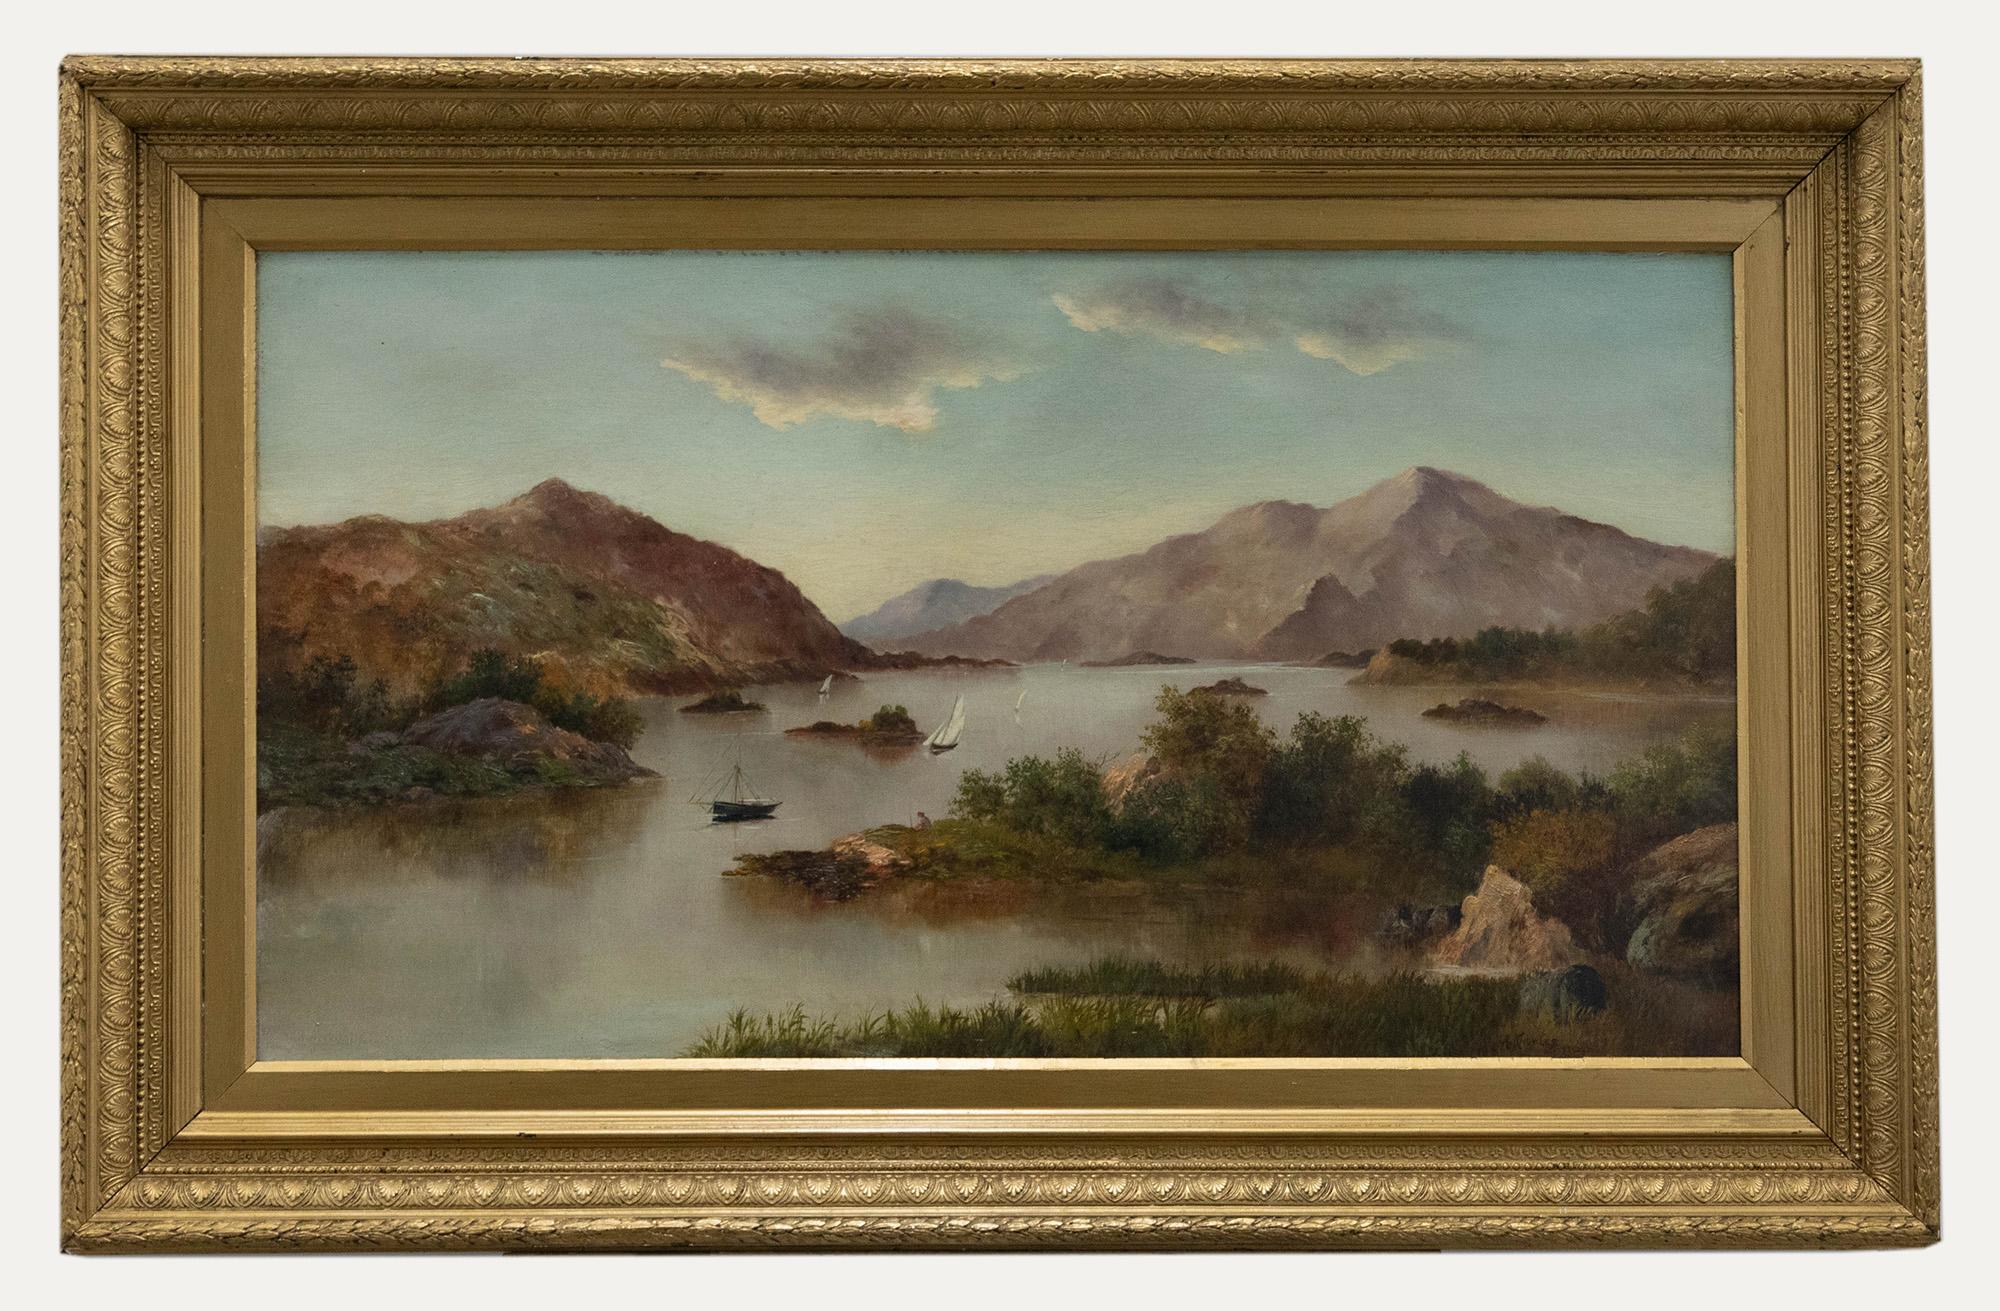 Unknown Landscape Painting - A. Knowles - Framed Late 19th Century Oil, Sailing on the Loch